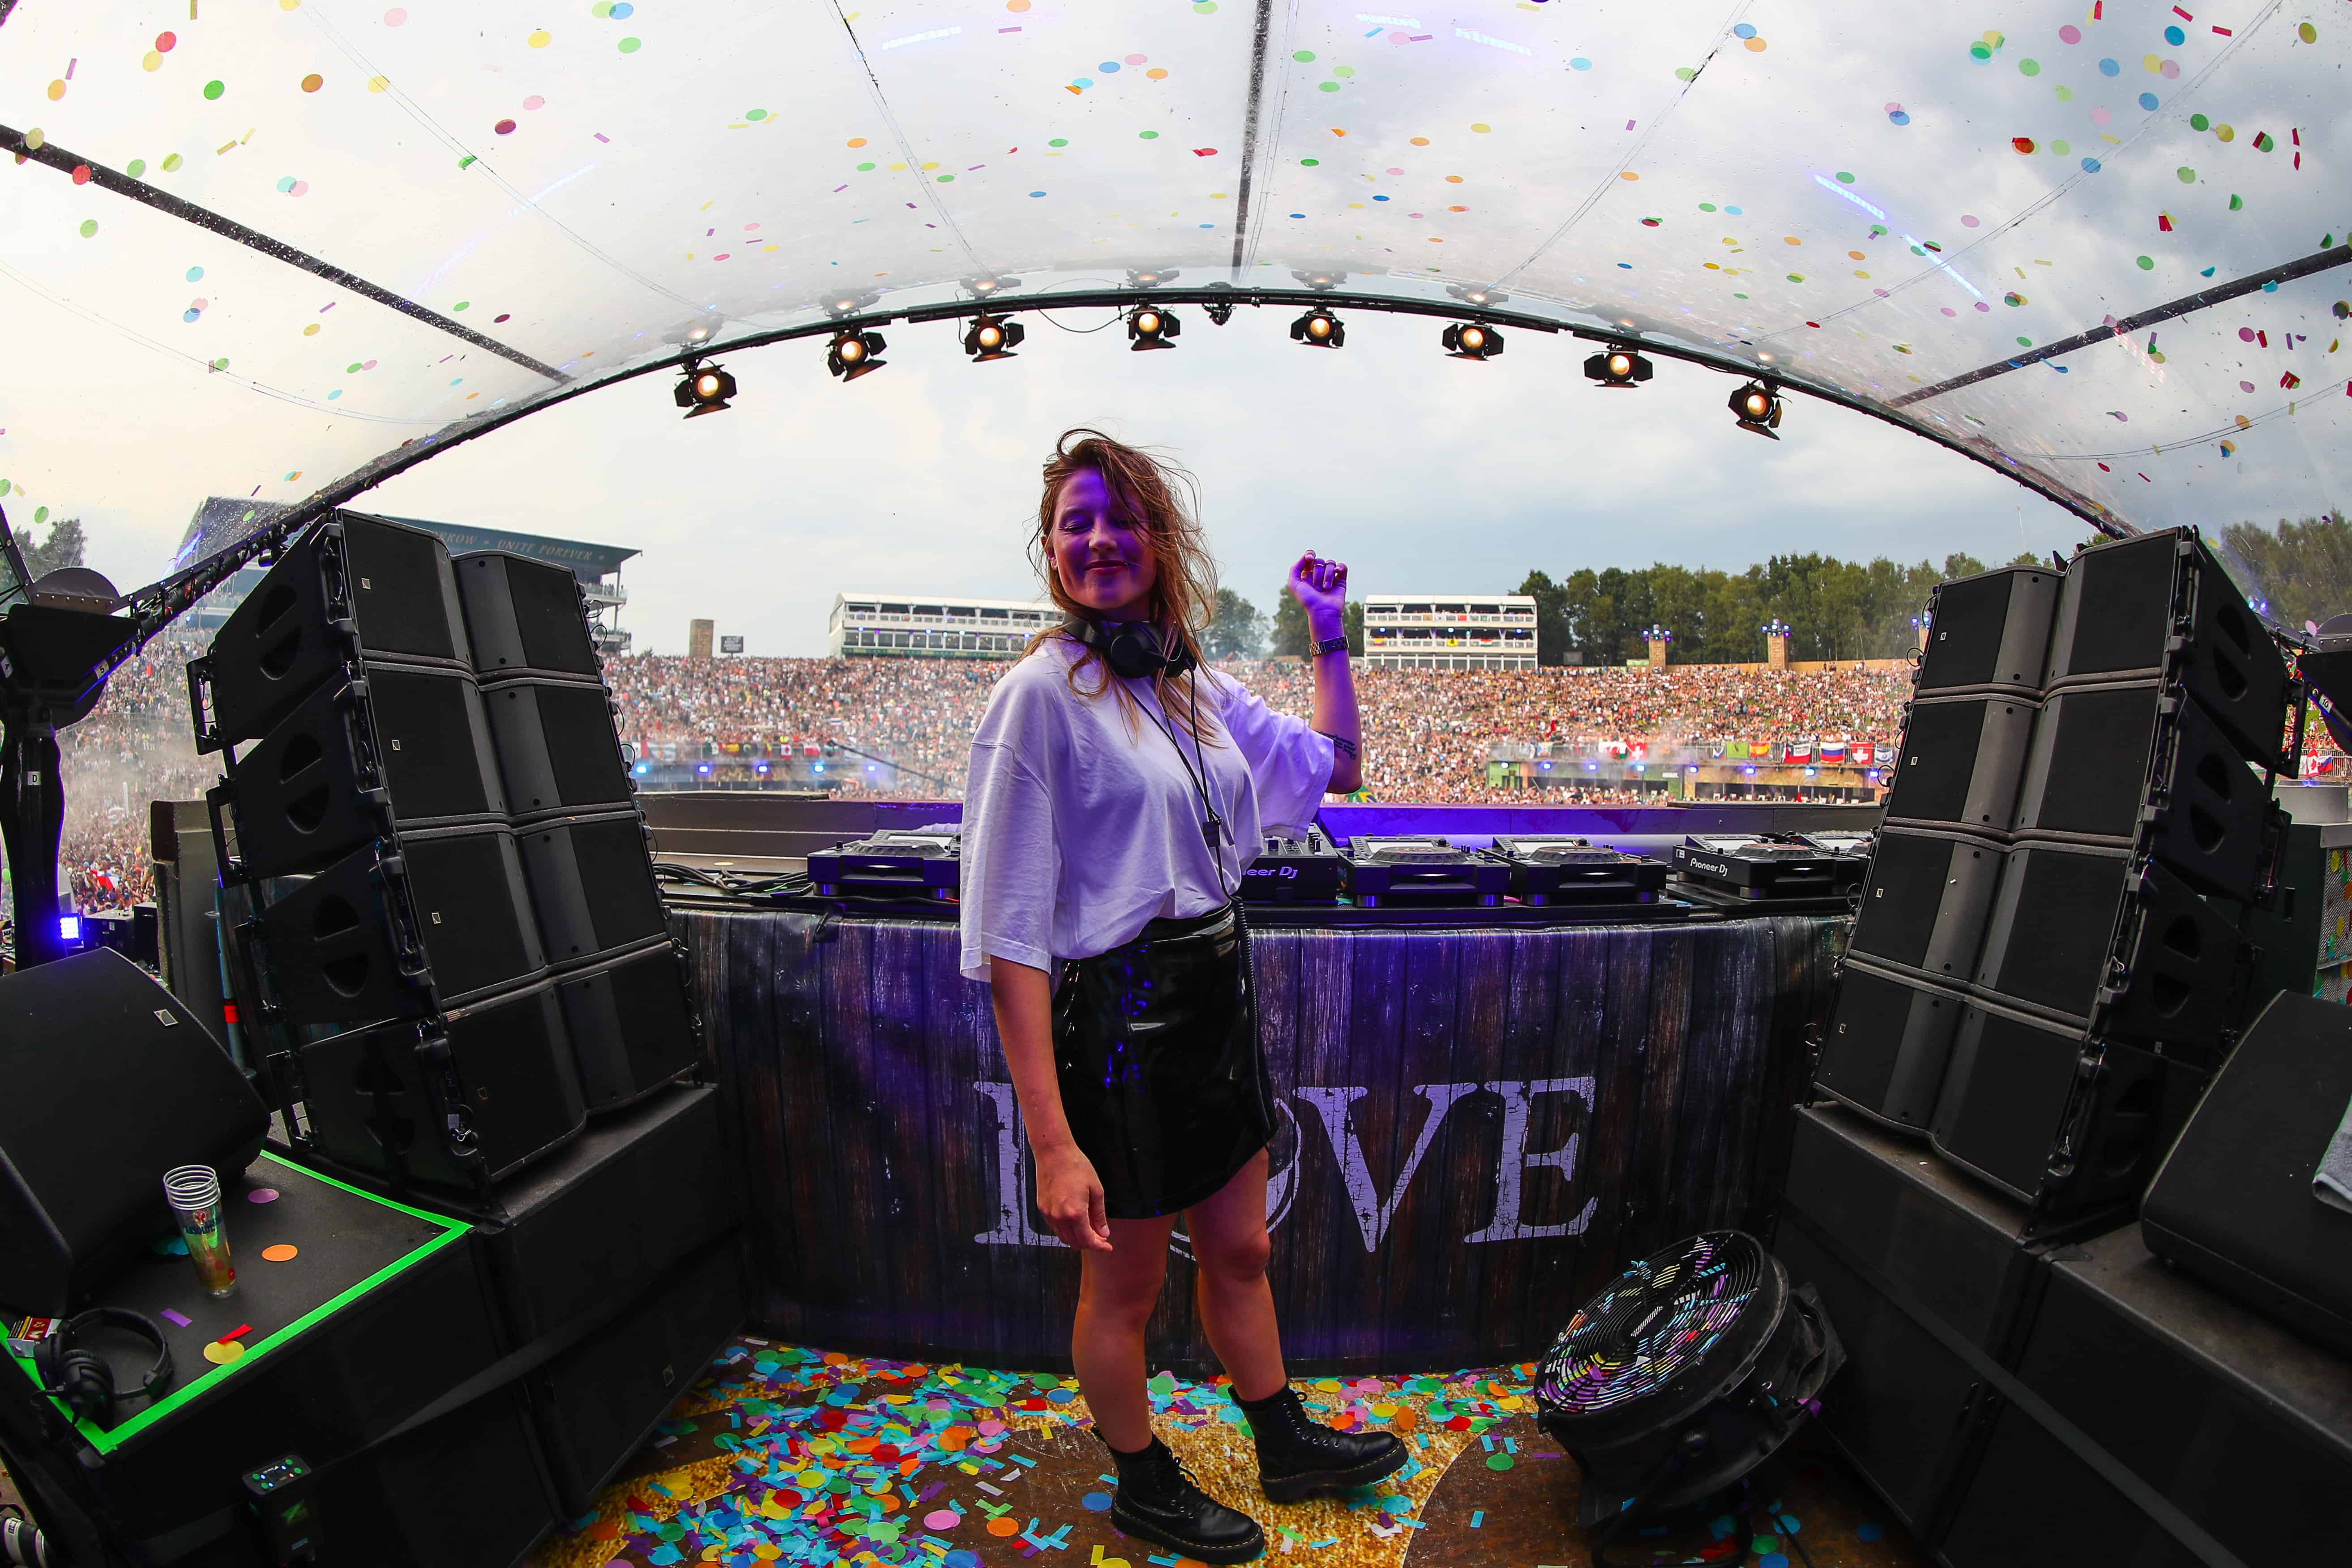 Charlotte de Witte to become first ever female headliner to close Tomorrowland mainstage